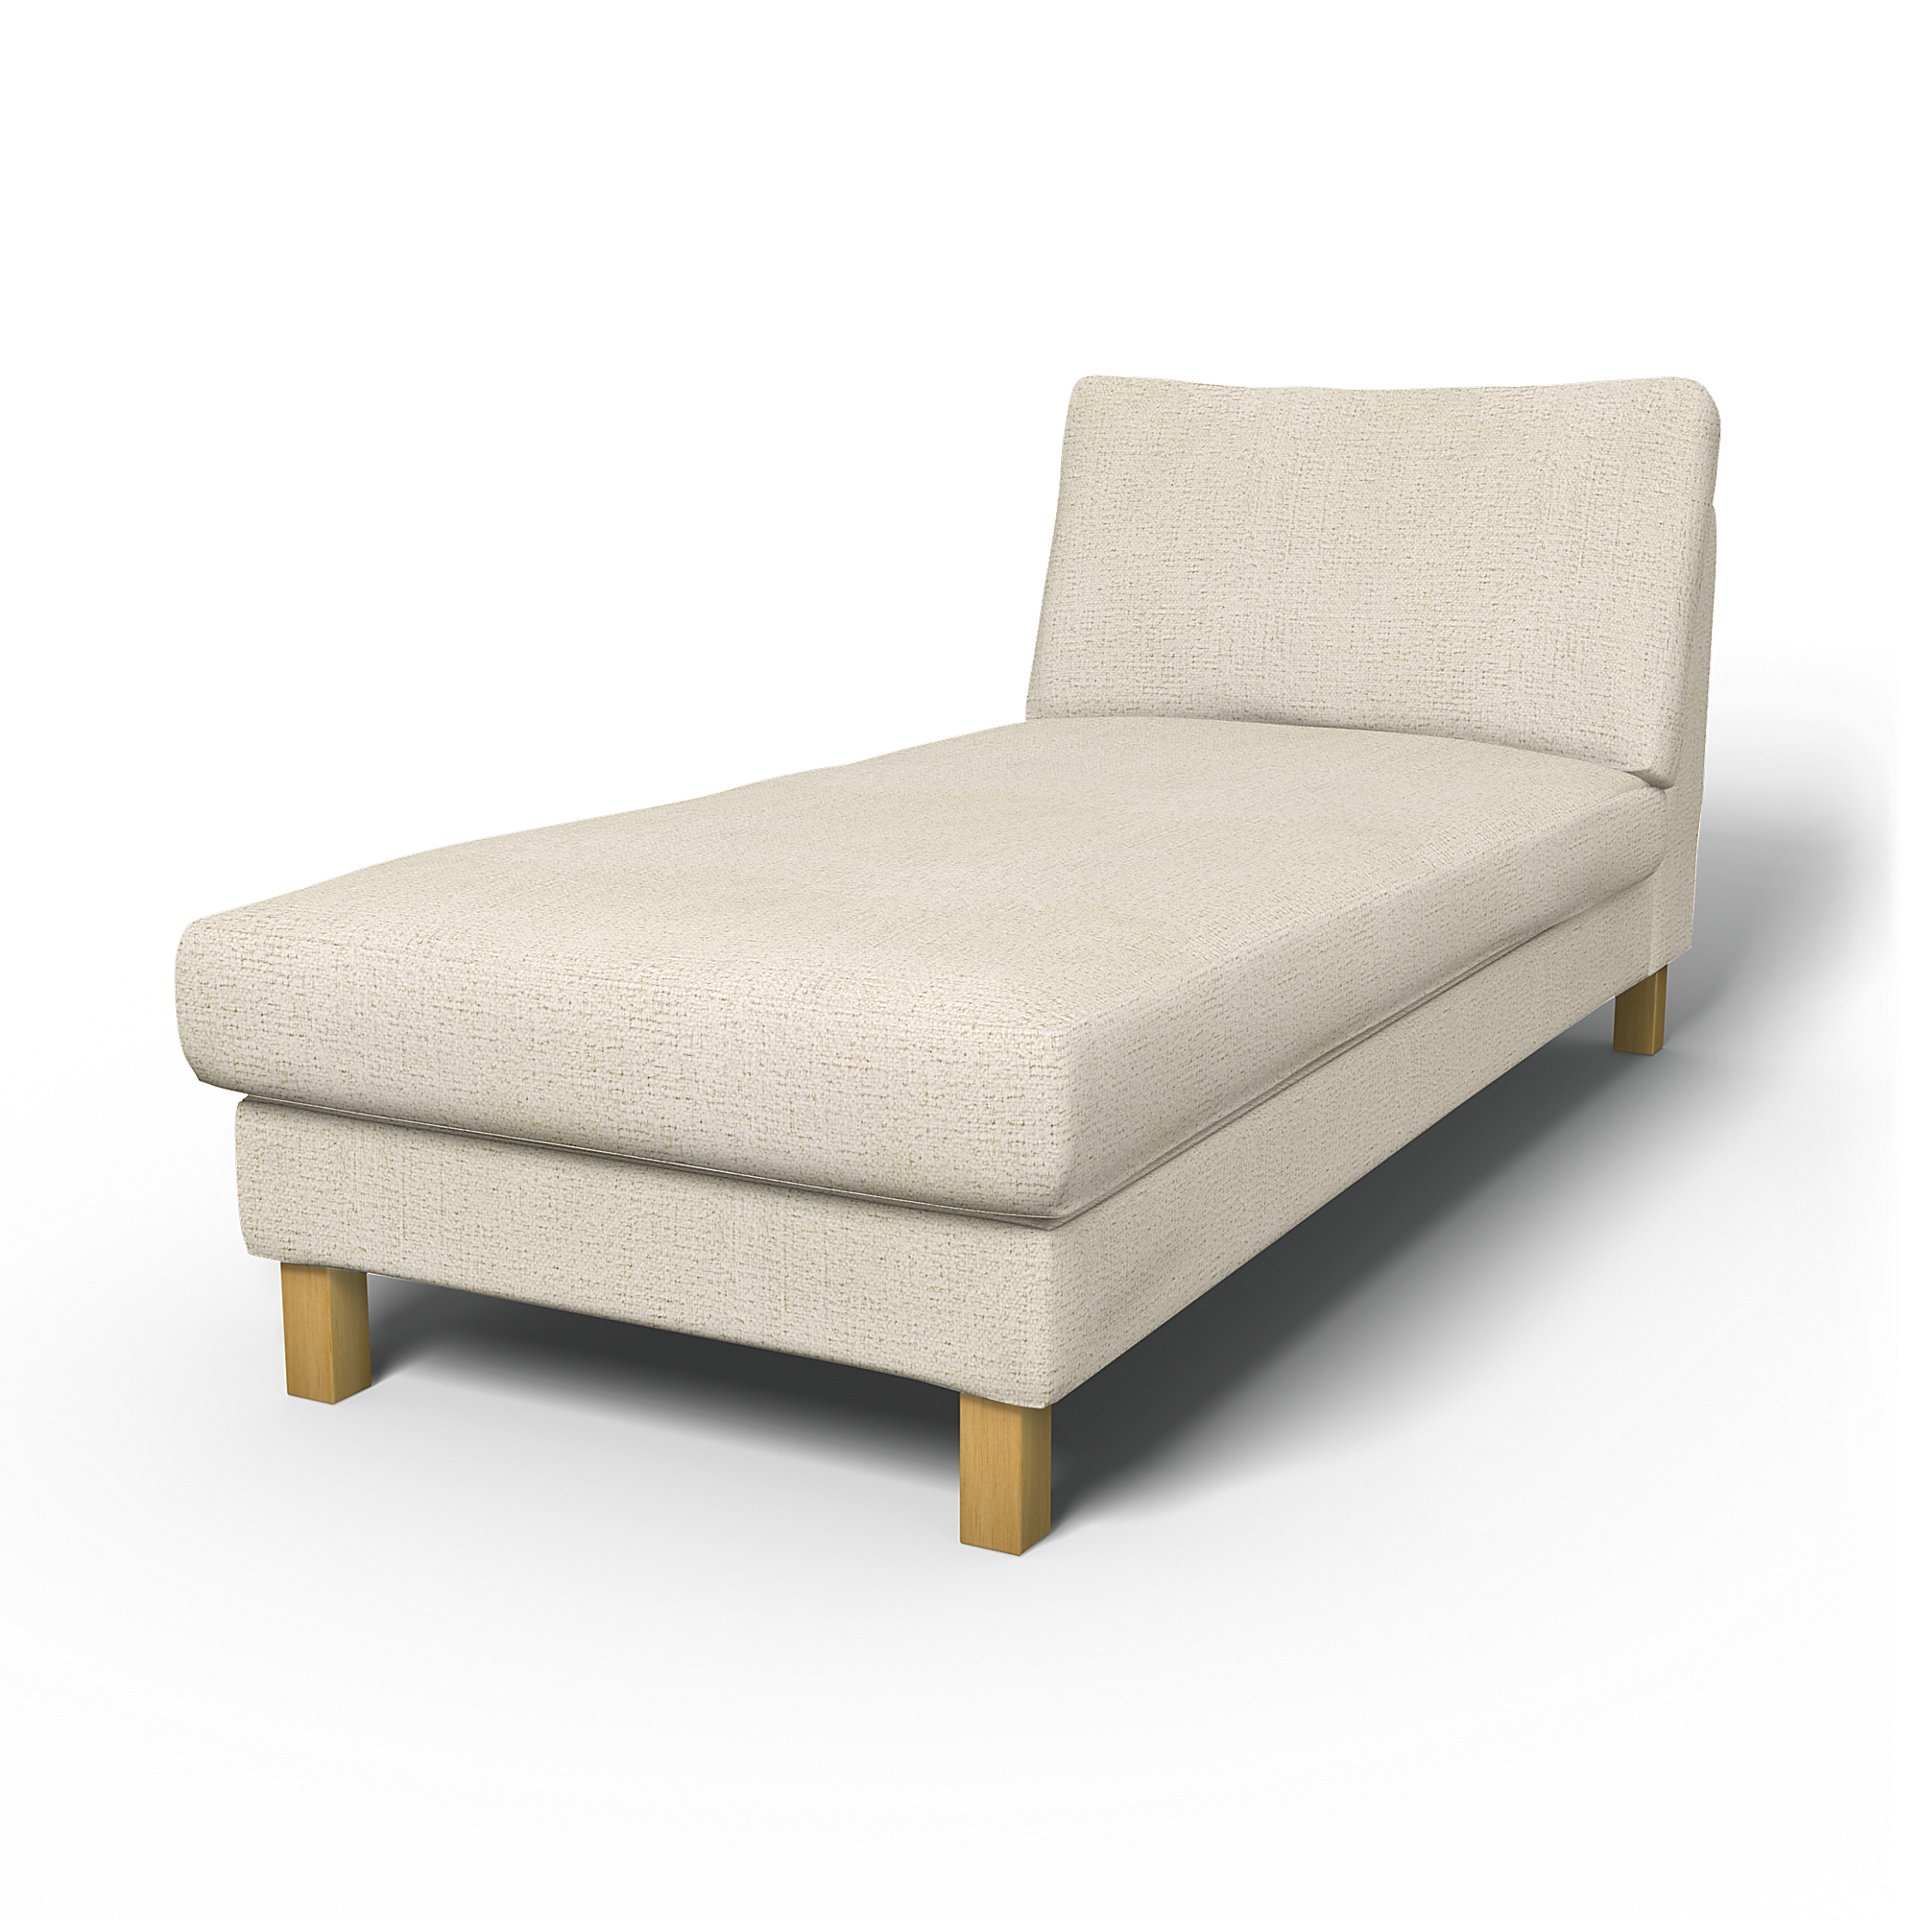 IKEA - Karlstad Stand Alone Chaise Longue Cover, Ecru, Boucle & Texture - Bemz